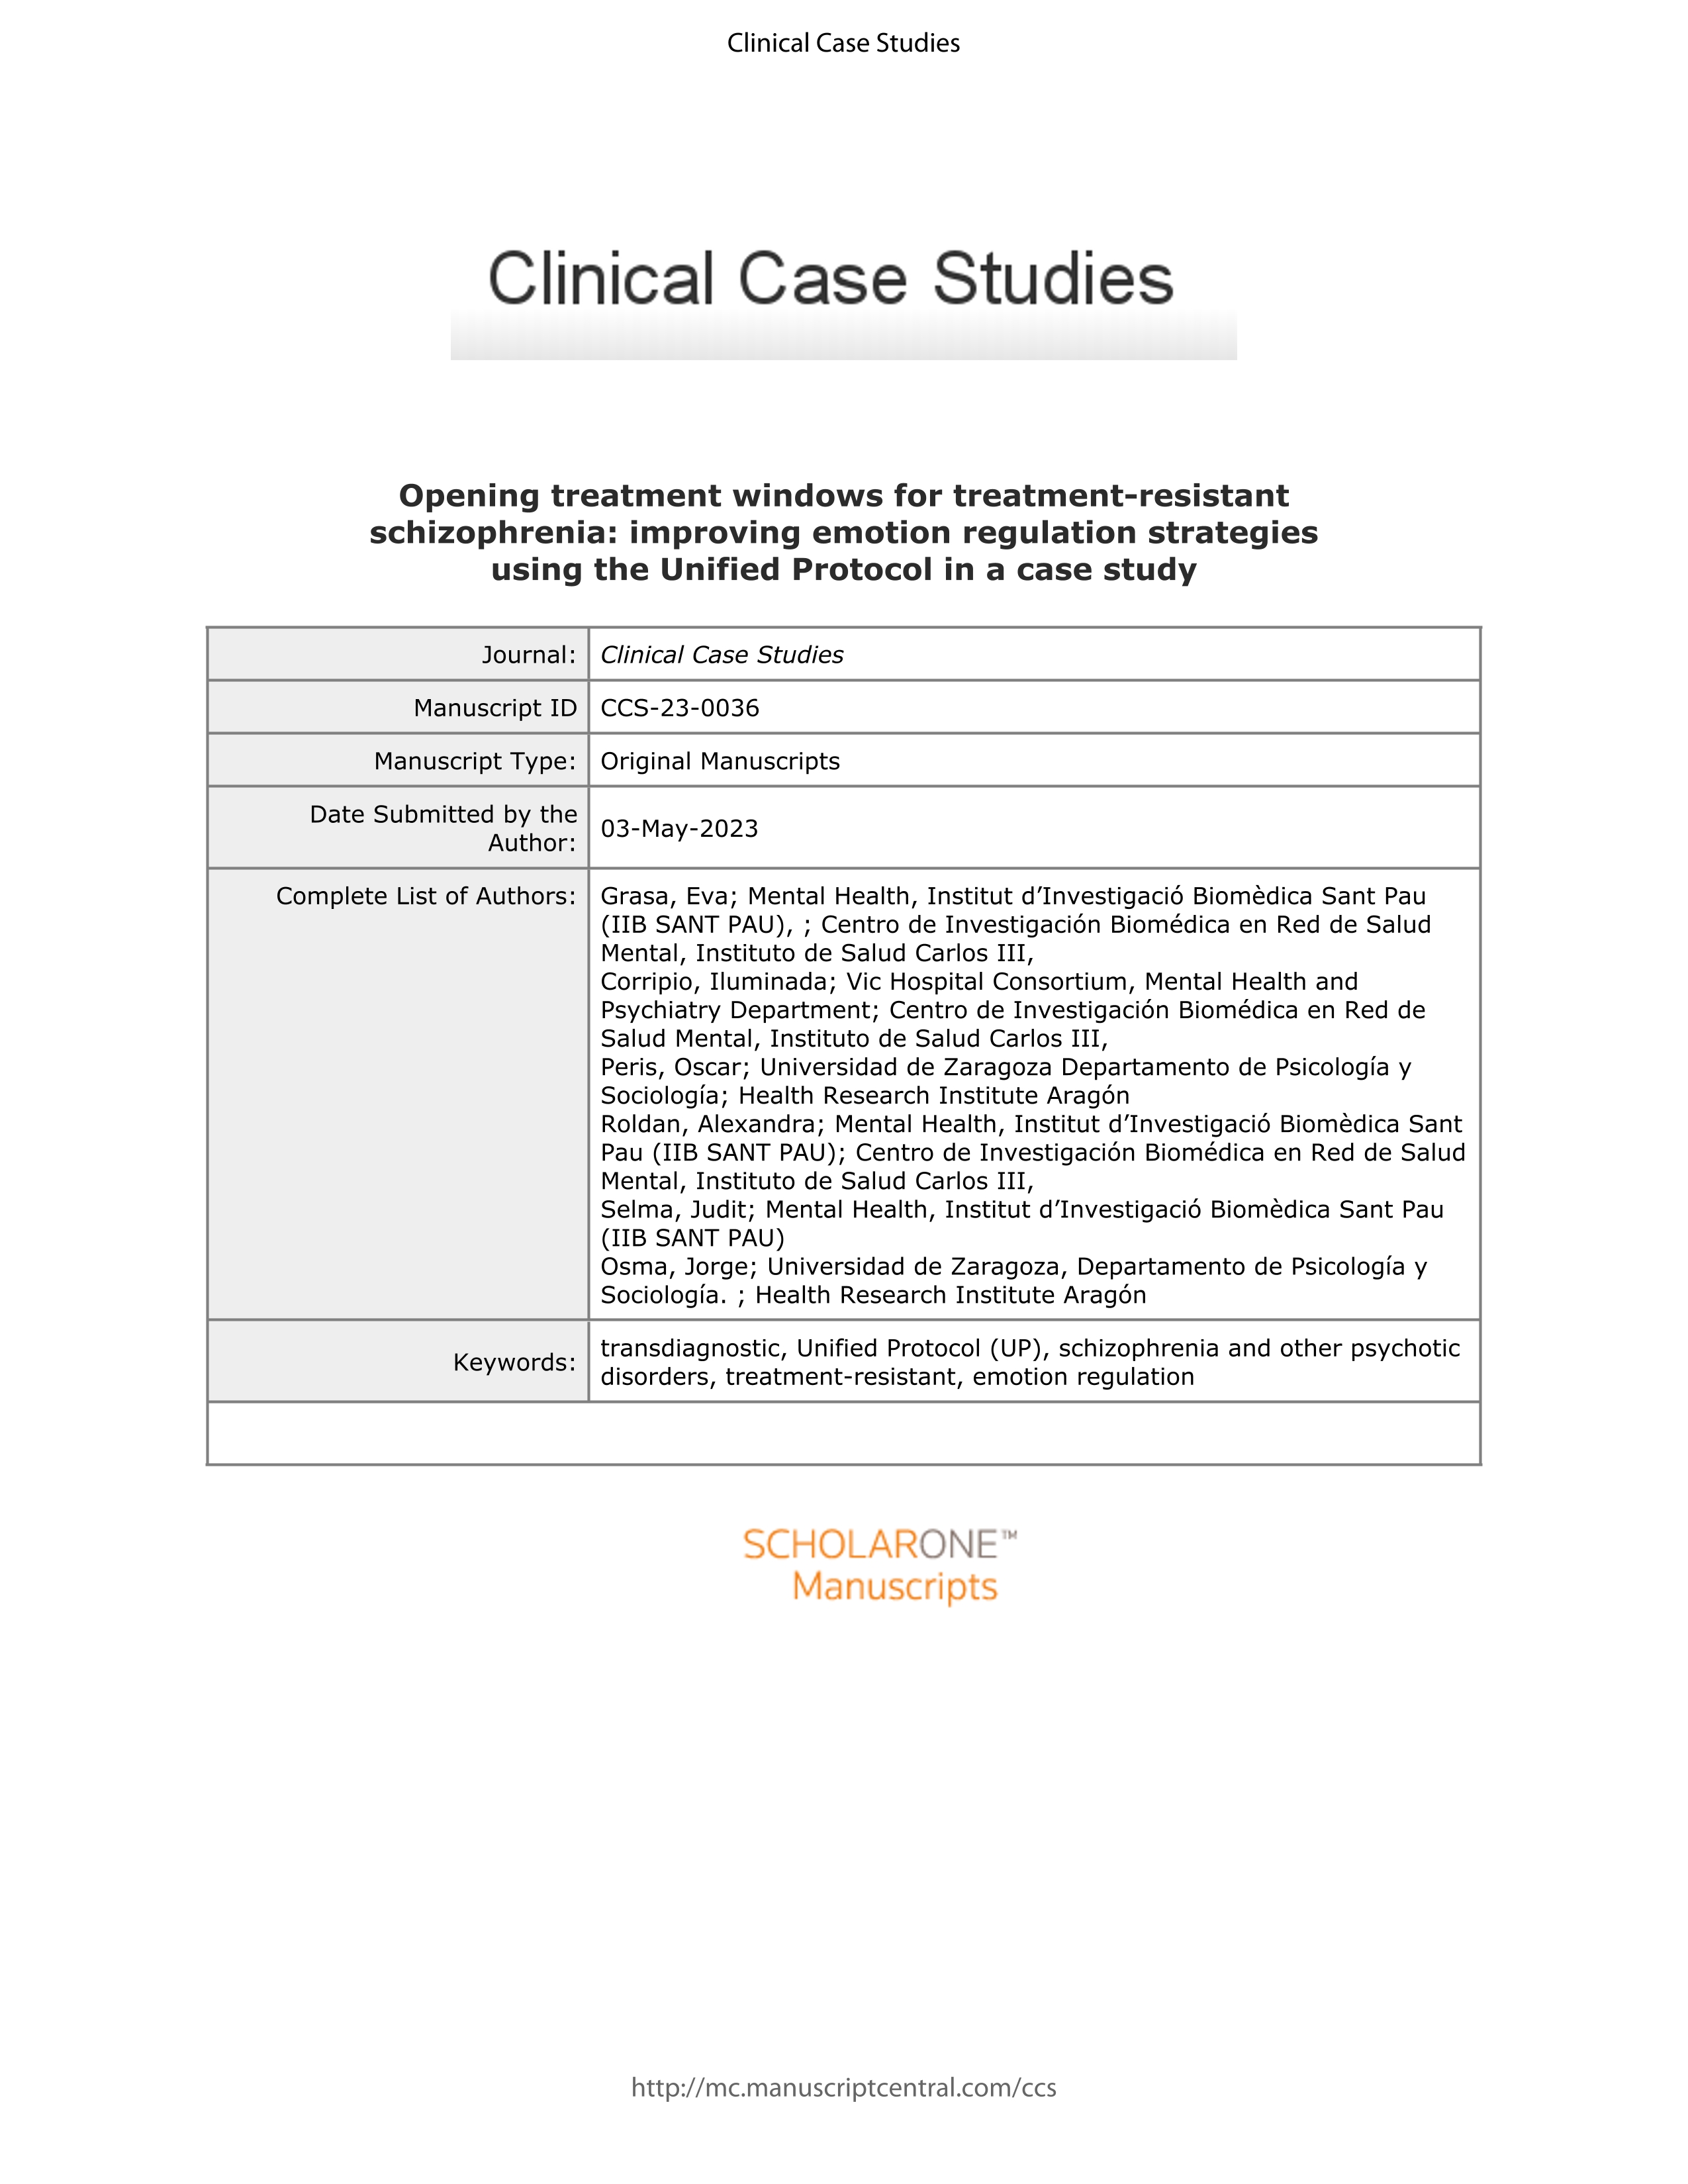 Opening treatment windows for treatment-resistant schizophrenia: improving emotion regulation strategies using the unified protocol in a case study in spain